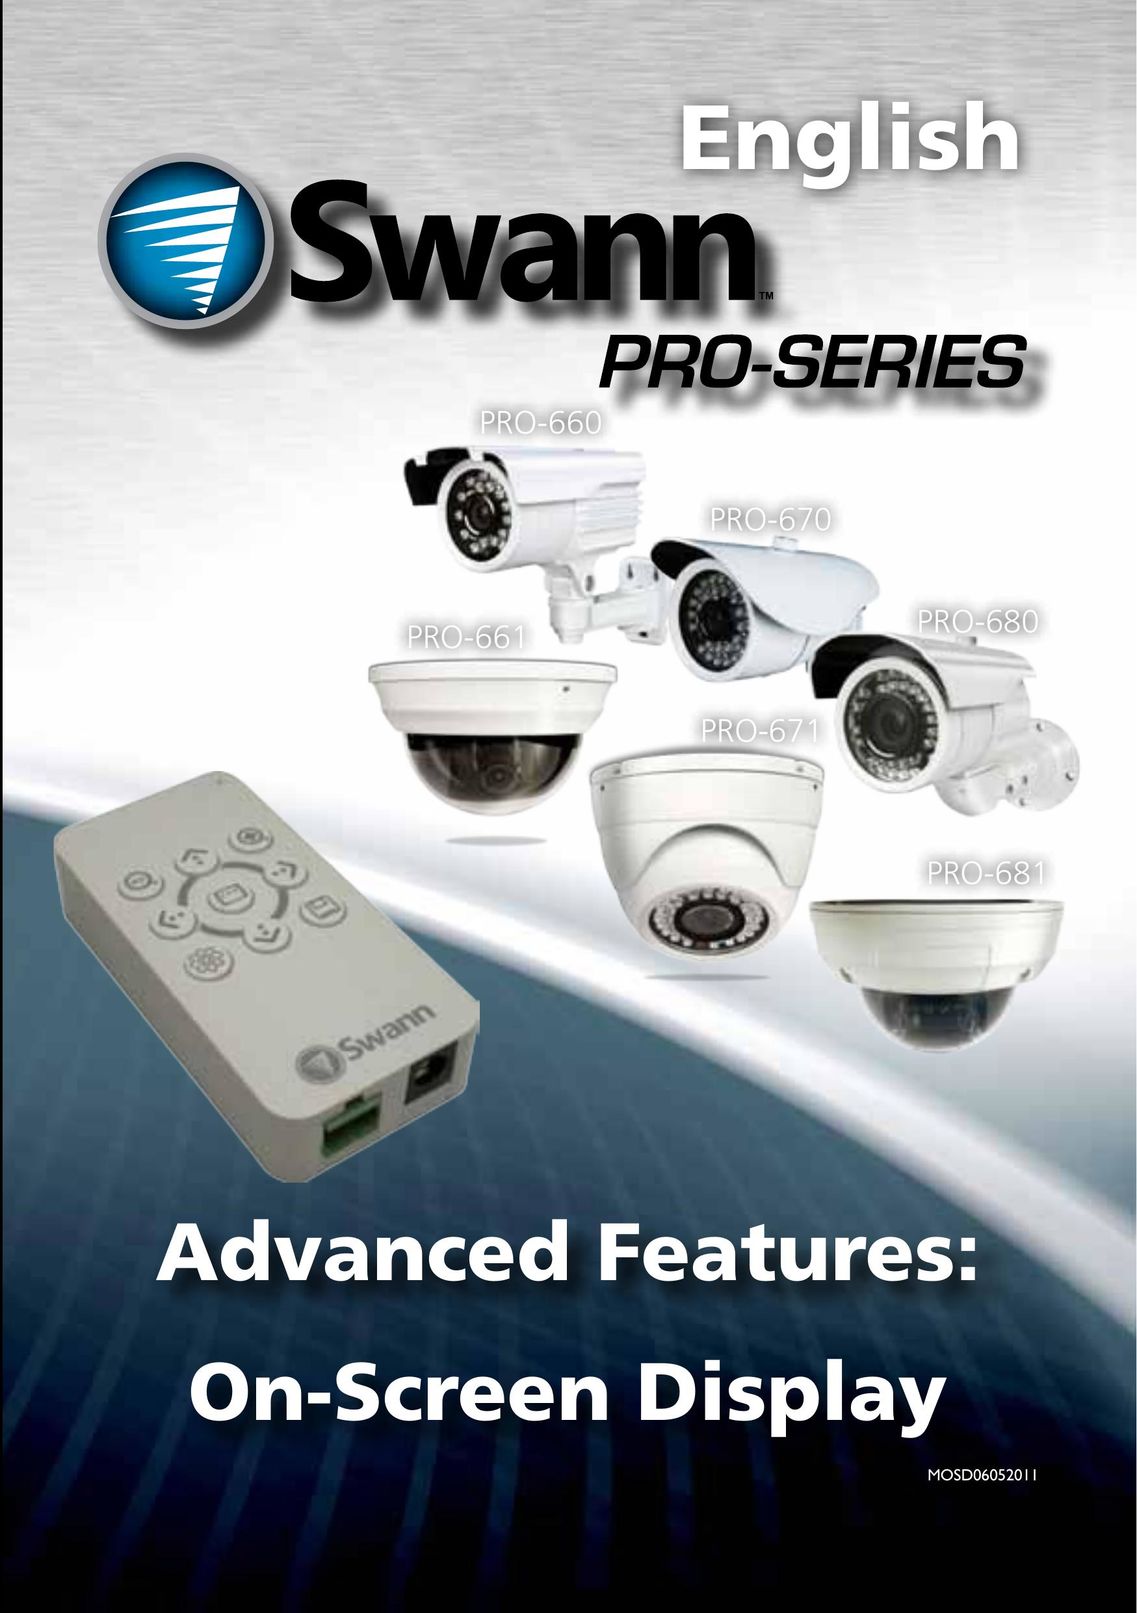 Swann PRO-681 Home Security System User Manual